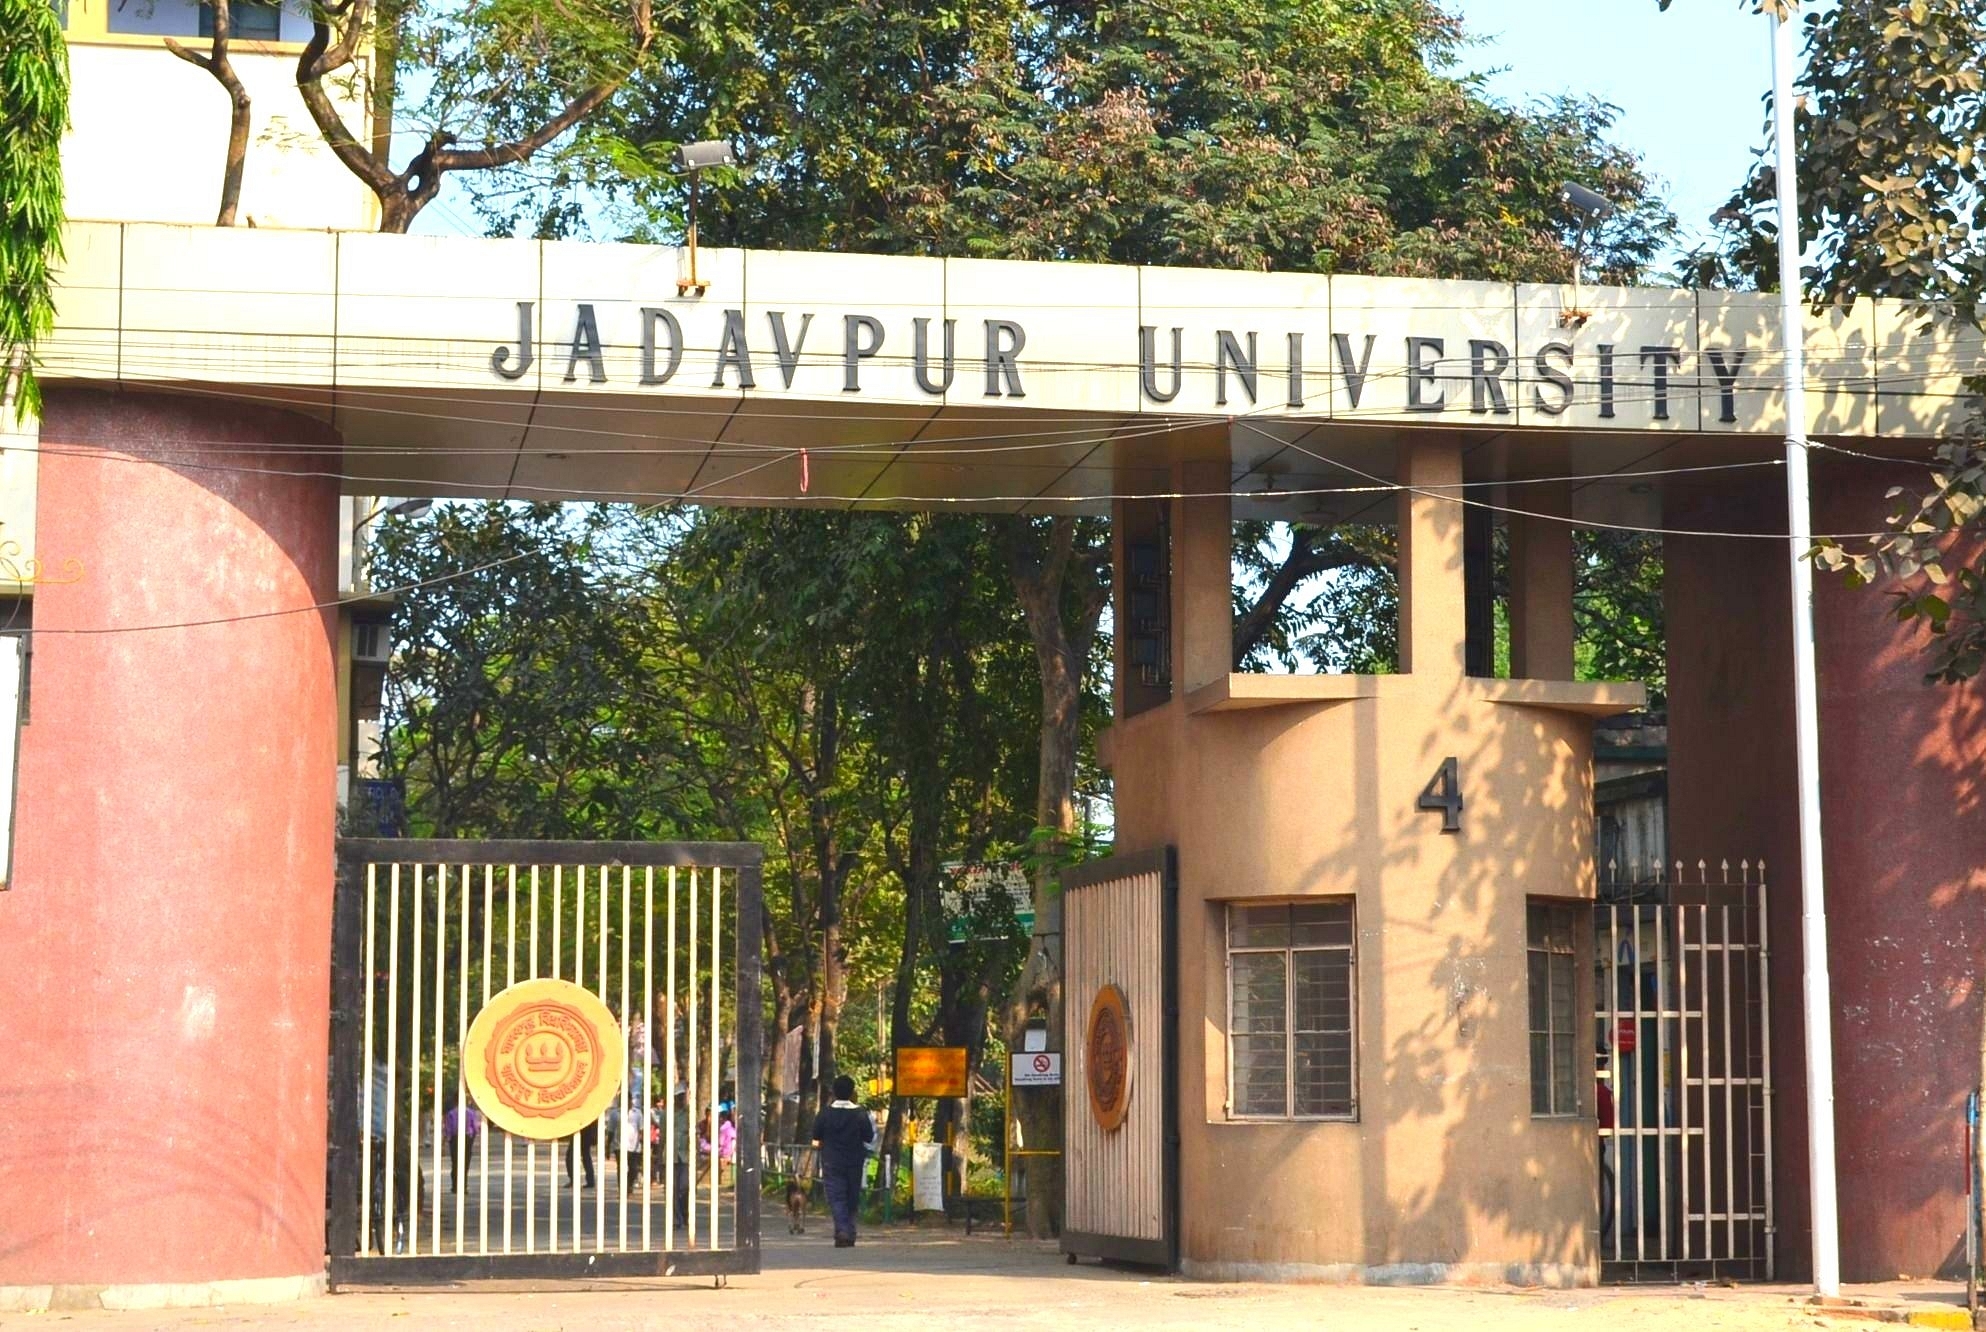 The entry to the Arts Faculty of Jadavpur University. (<a href="https://commons.wikimedia.org/w/index.php?title=User:Gourav_Ghosh&amp;action=edit&amp;redlink=1">Gourav Ghosh</a>/Wikipedia)